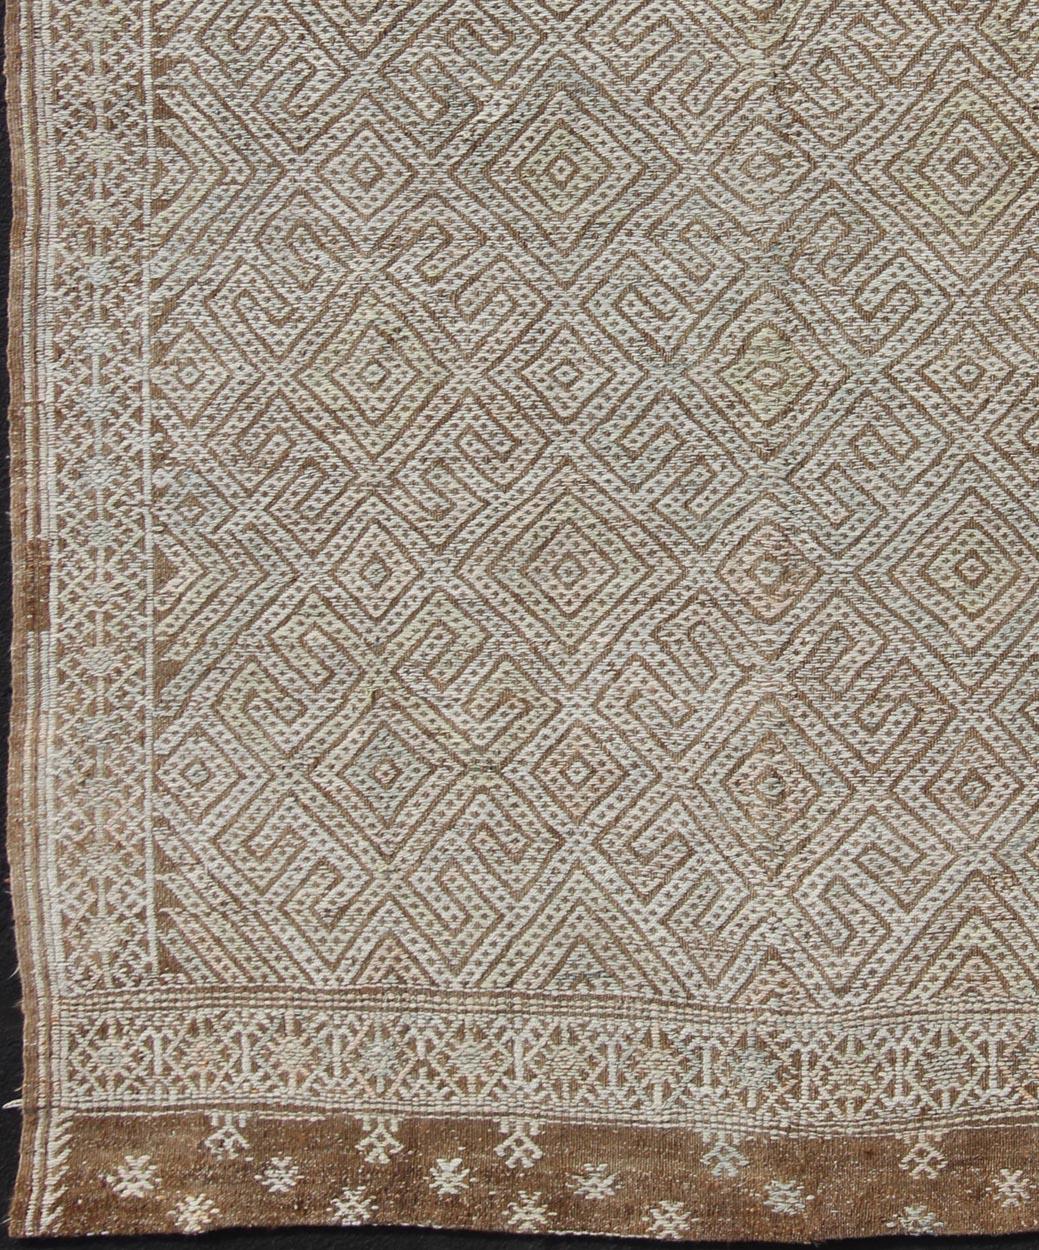 Geometric design vintage Kilim rug from Turkey in natural tones, rug en-165322, country of origin / type: Turkey / Kilim, circa 1950

Featuring a beautiful geometric design rendered in various color tones, and framed at the top and bottom of the